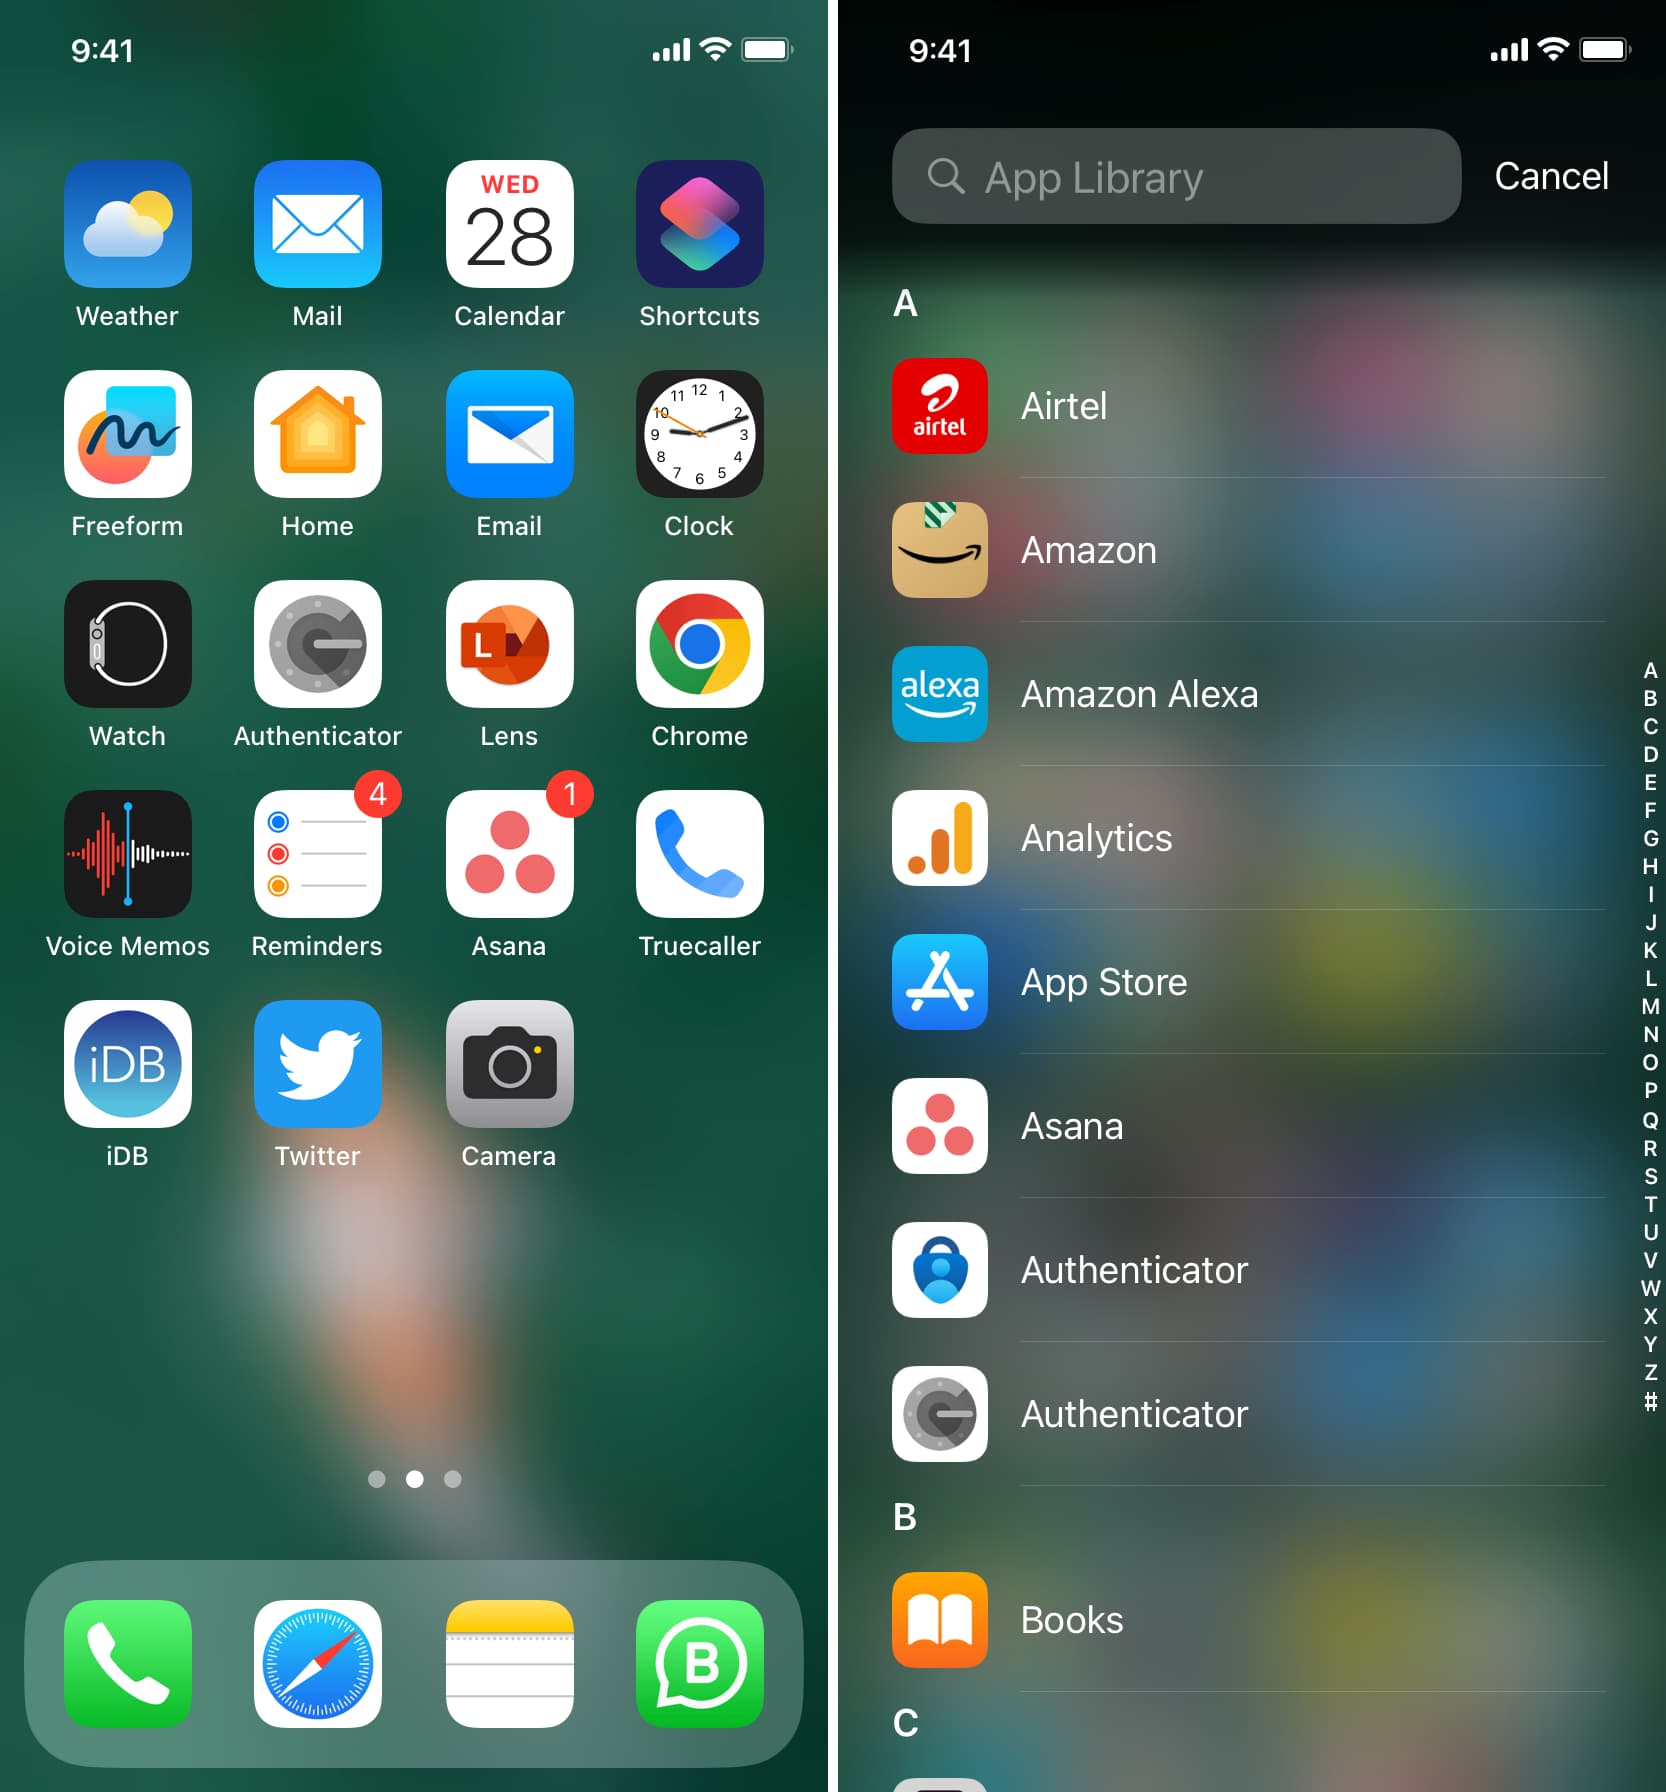 iPhone Home Screen and App Library showing iOS apps